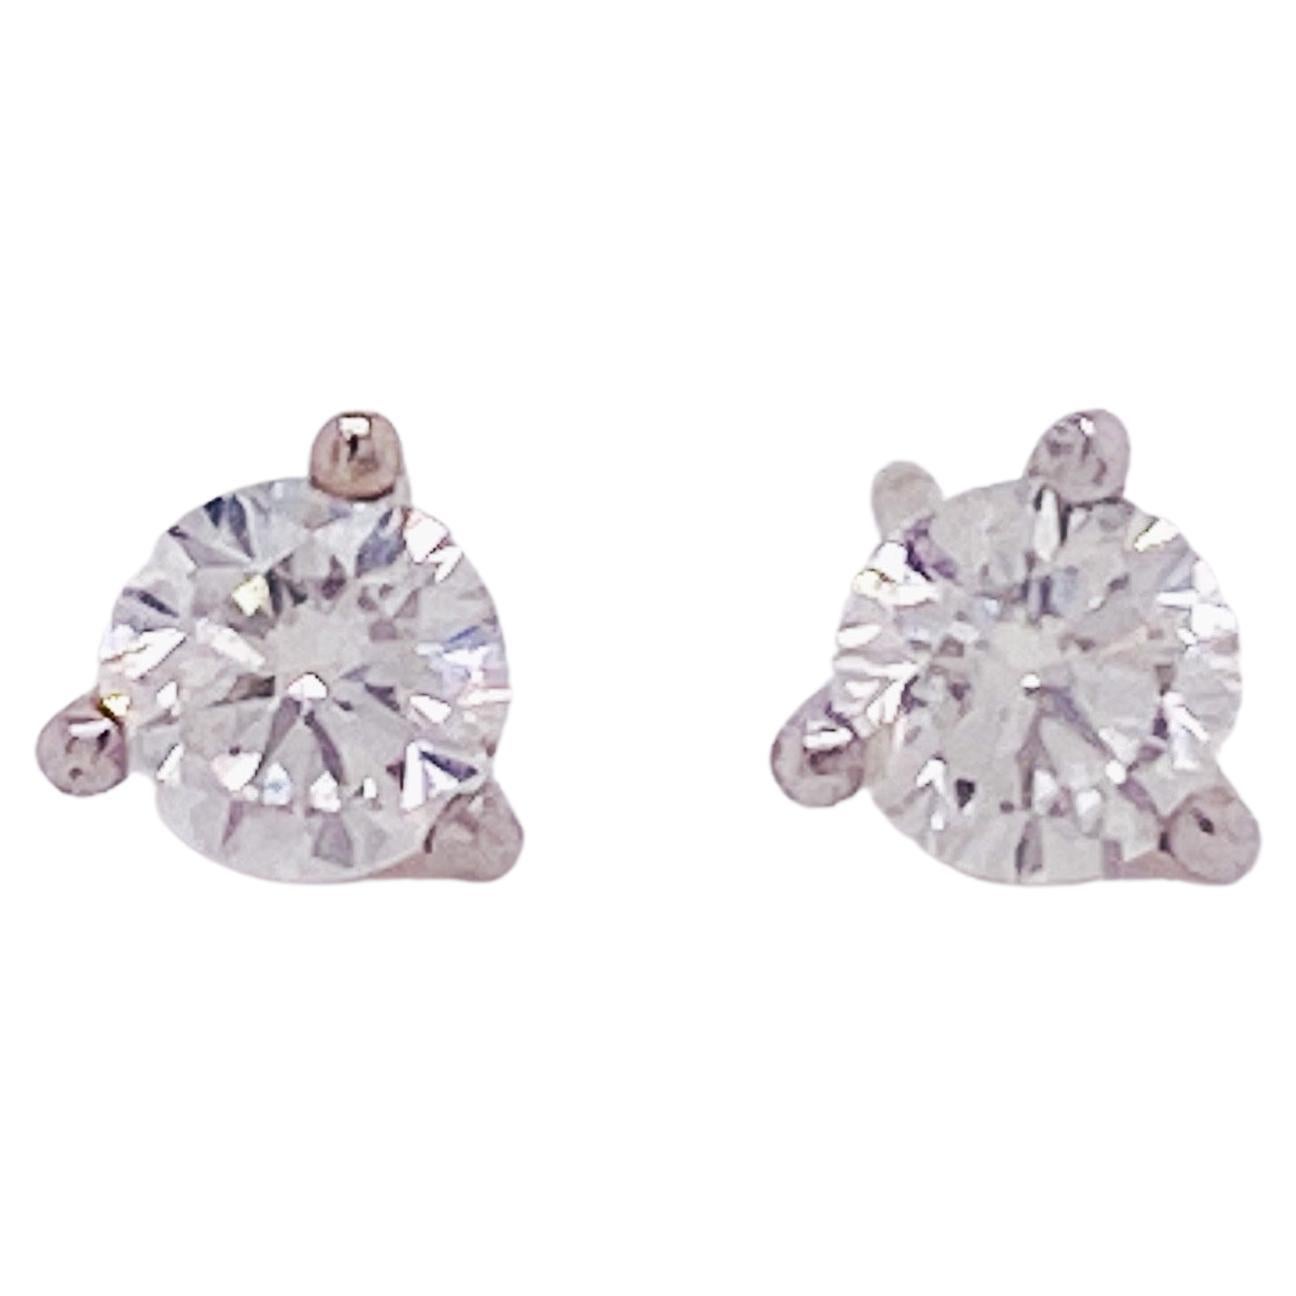 Diamond Martini Stud Earrings 1/2 Carat in 14K Gold, .50 Accent Stack LV